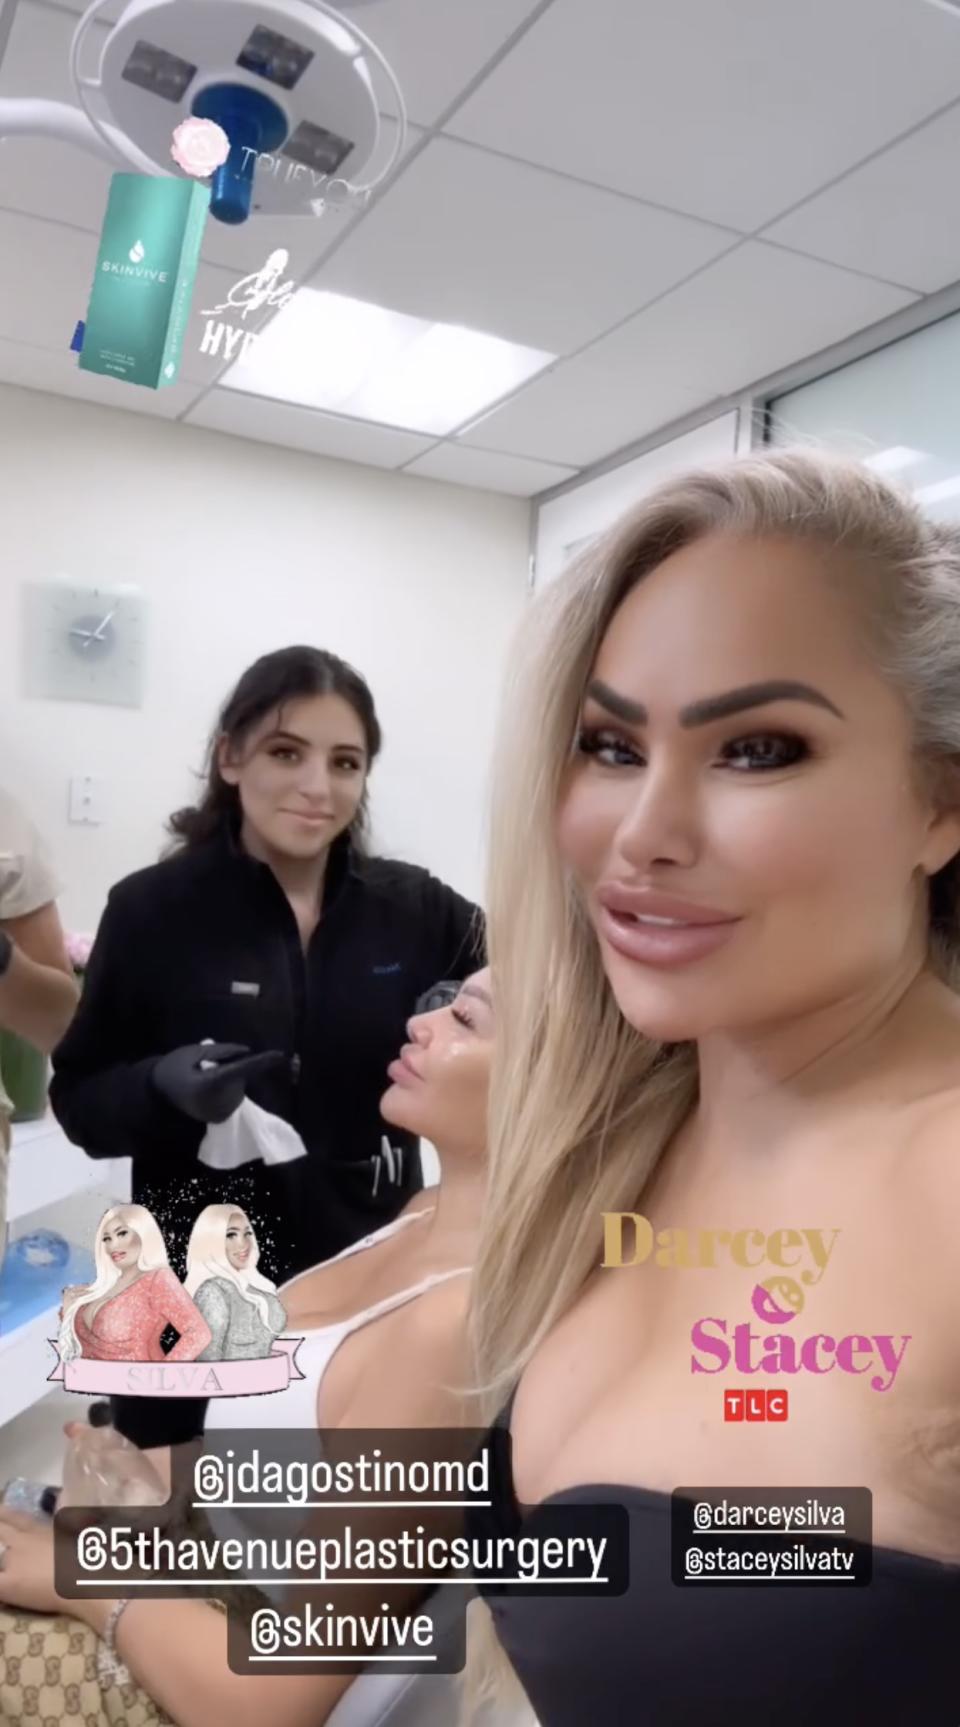 ‘90 Day Fiance’ Alums Darcey and Stacey Silva Reveals Latest Plastic Surgery Procedure- ‘Darcey Glow’